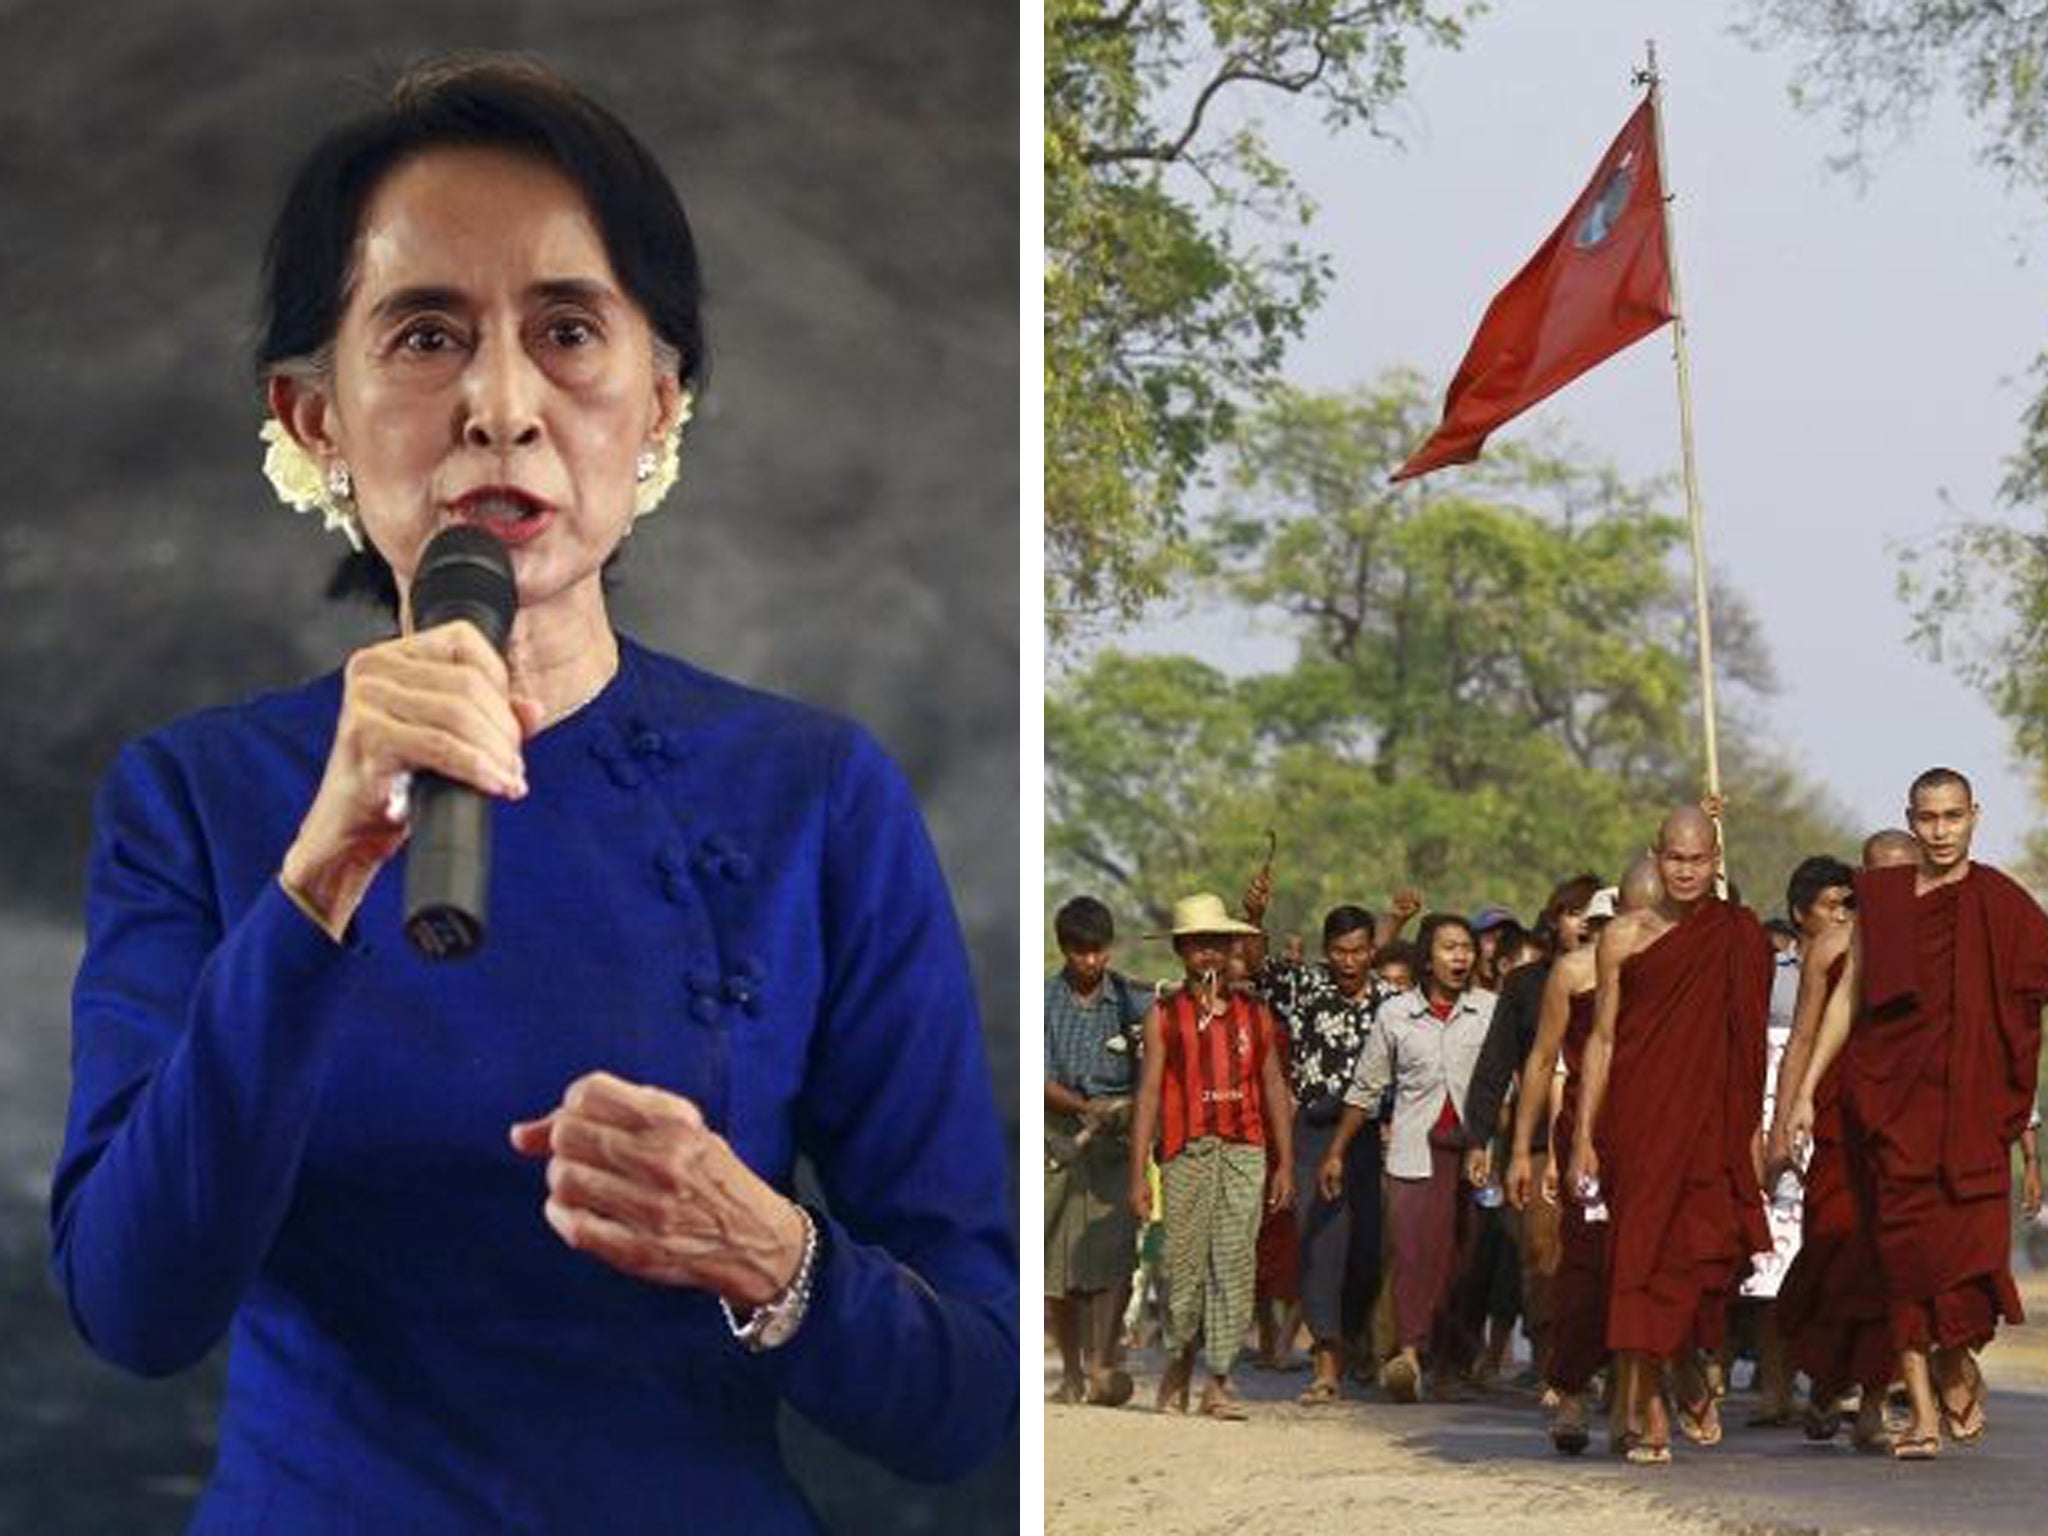 Myanmar pro-democracy leader Aung San Suu Kyi explains to villagers why she supports a copper mine project in Sarlingyi township while (right) they protest against it